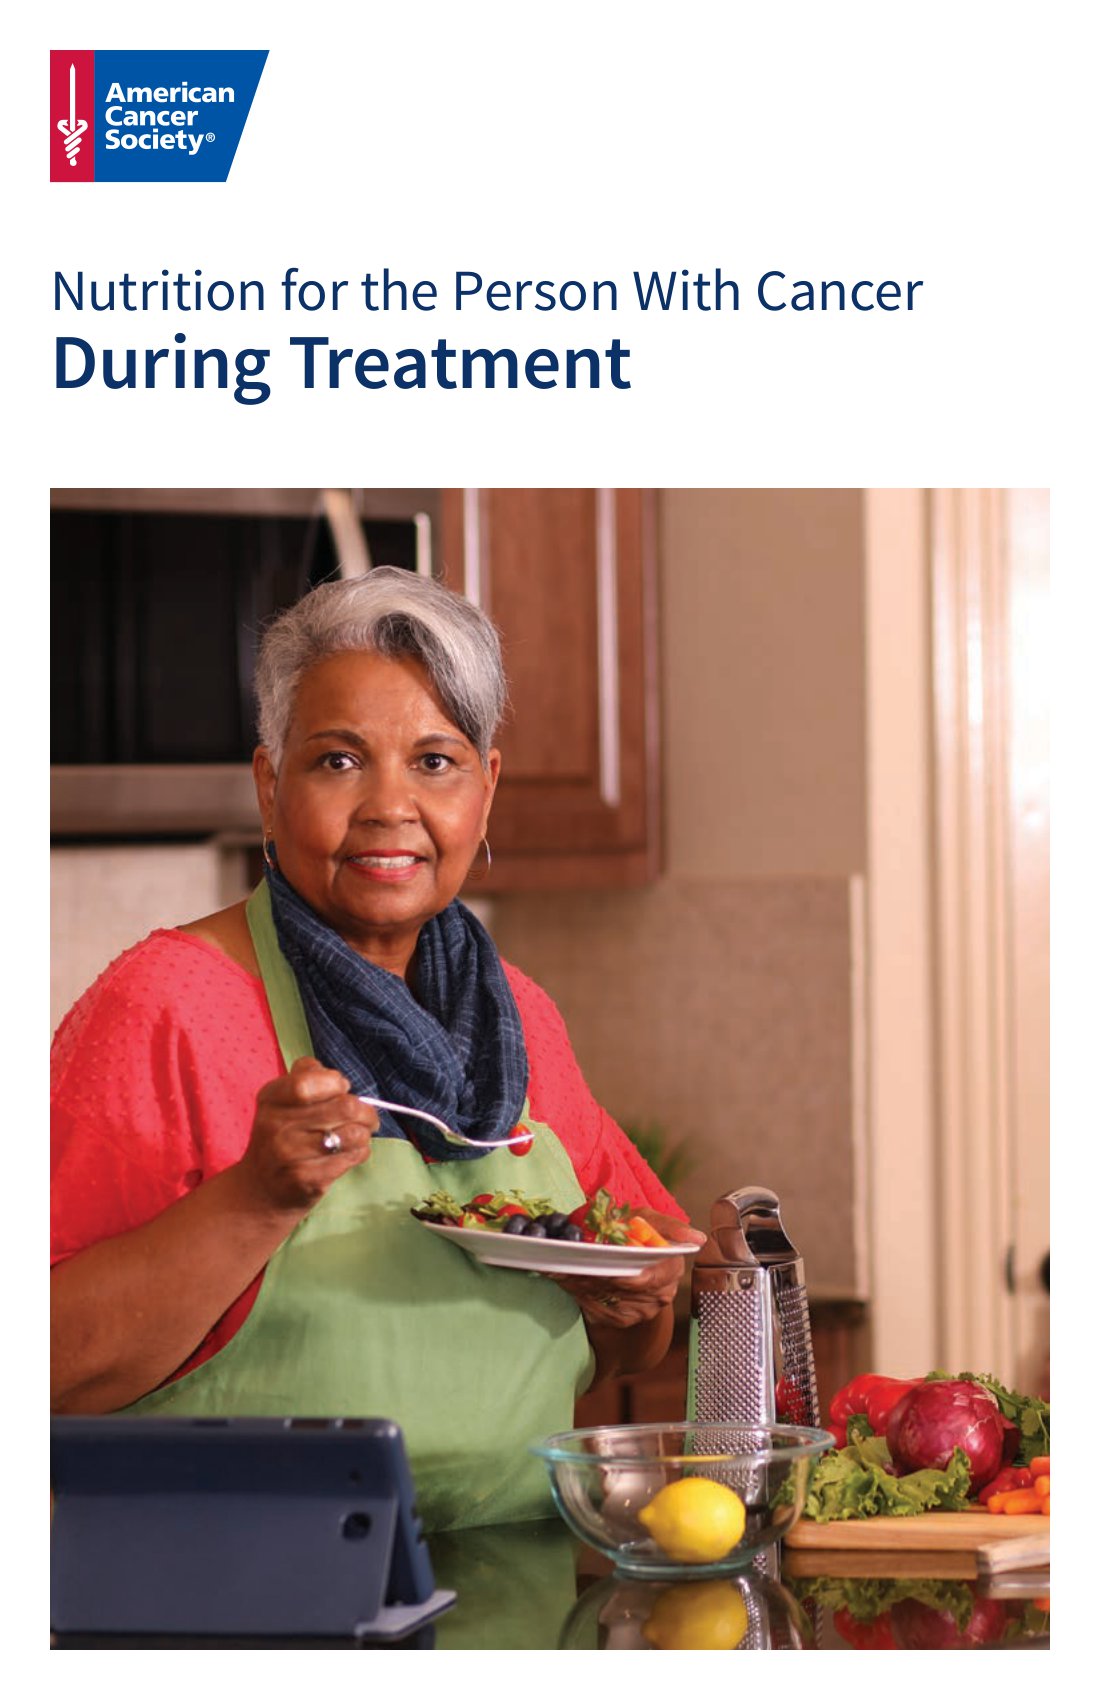 Nutrition for the Person with Cancer During Treatment - English (9410.00)